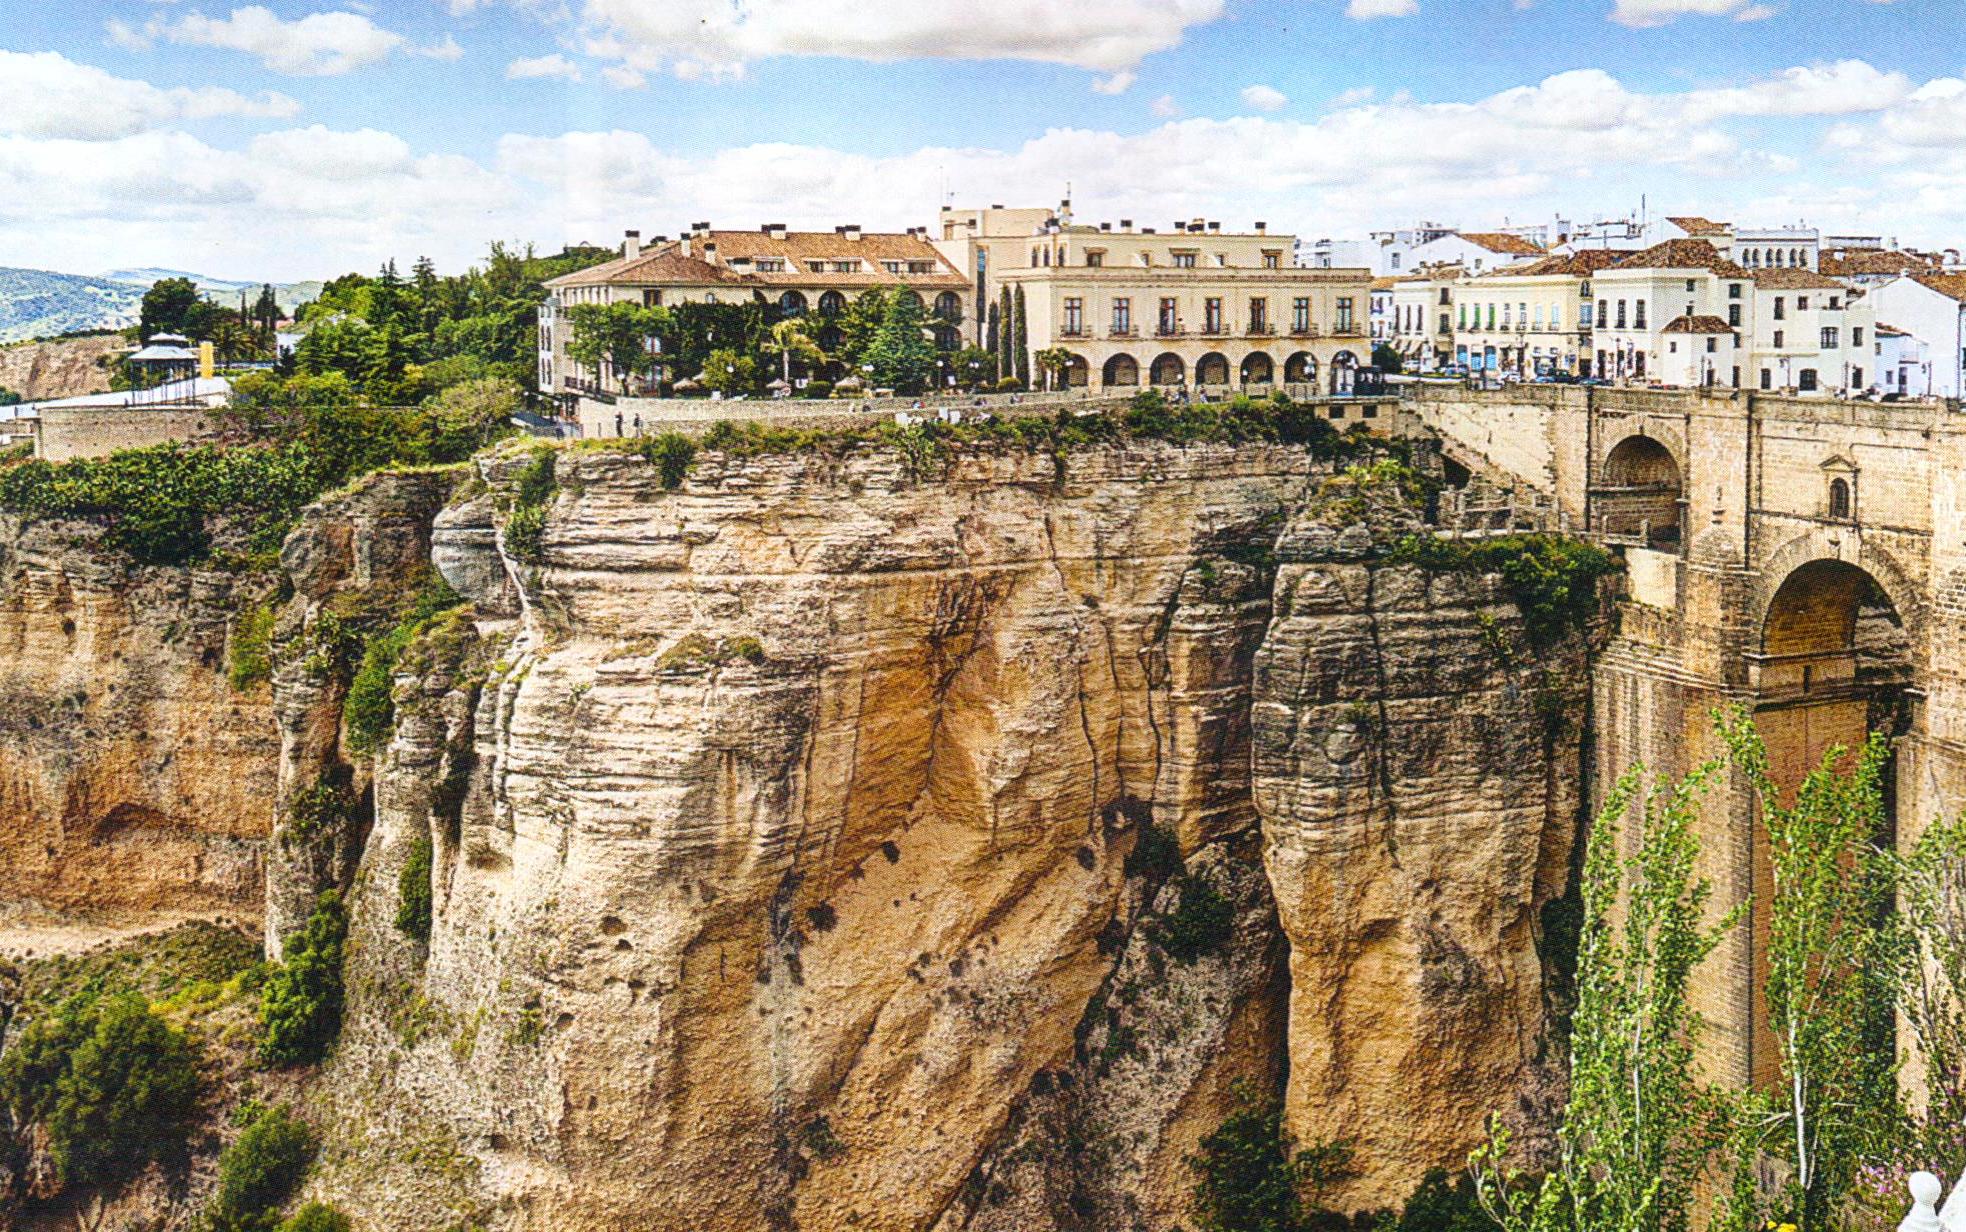 Ronda:
Your visit to Andalucía would not be complete without a tour of the town of Ronda. Ronda is a city in the province of Málaga